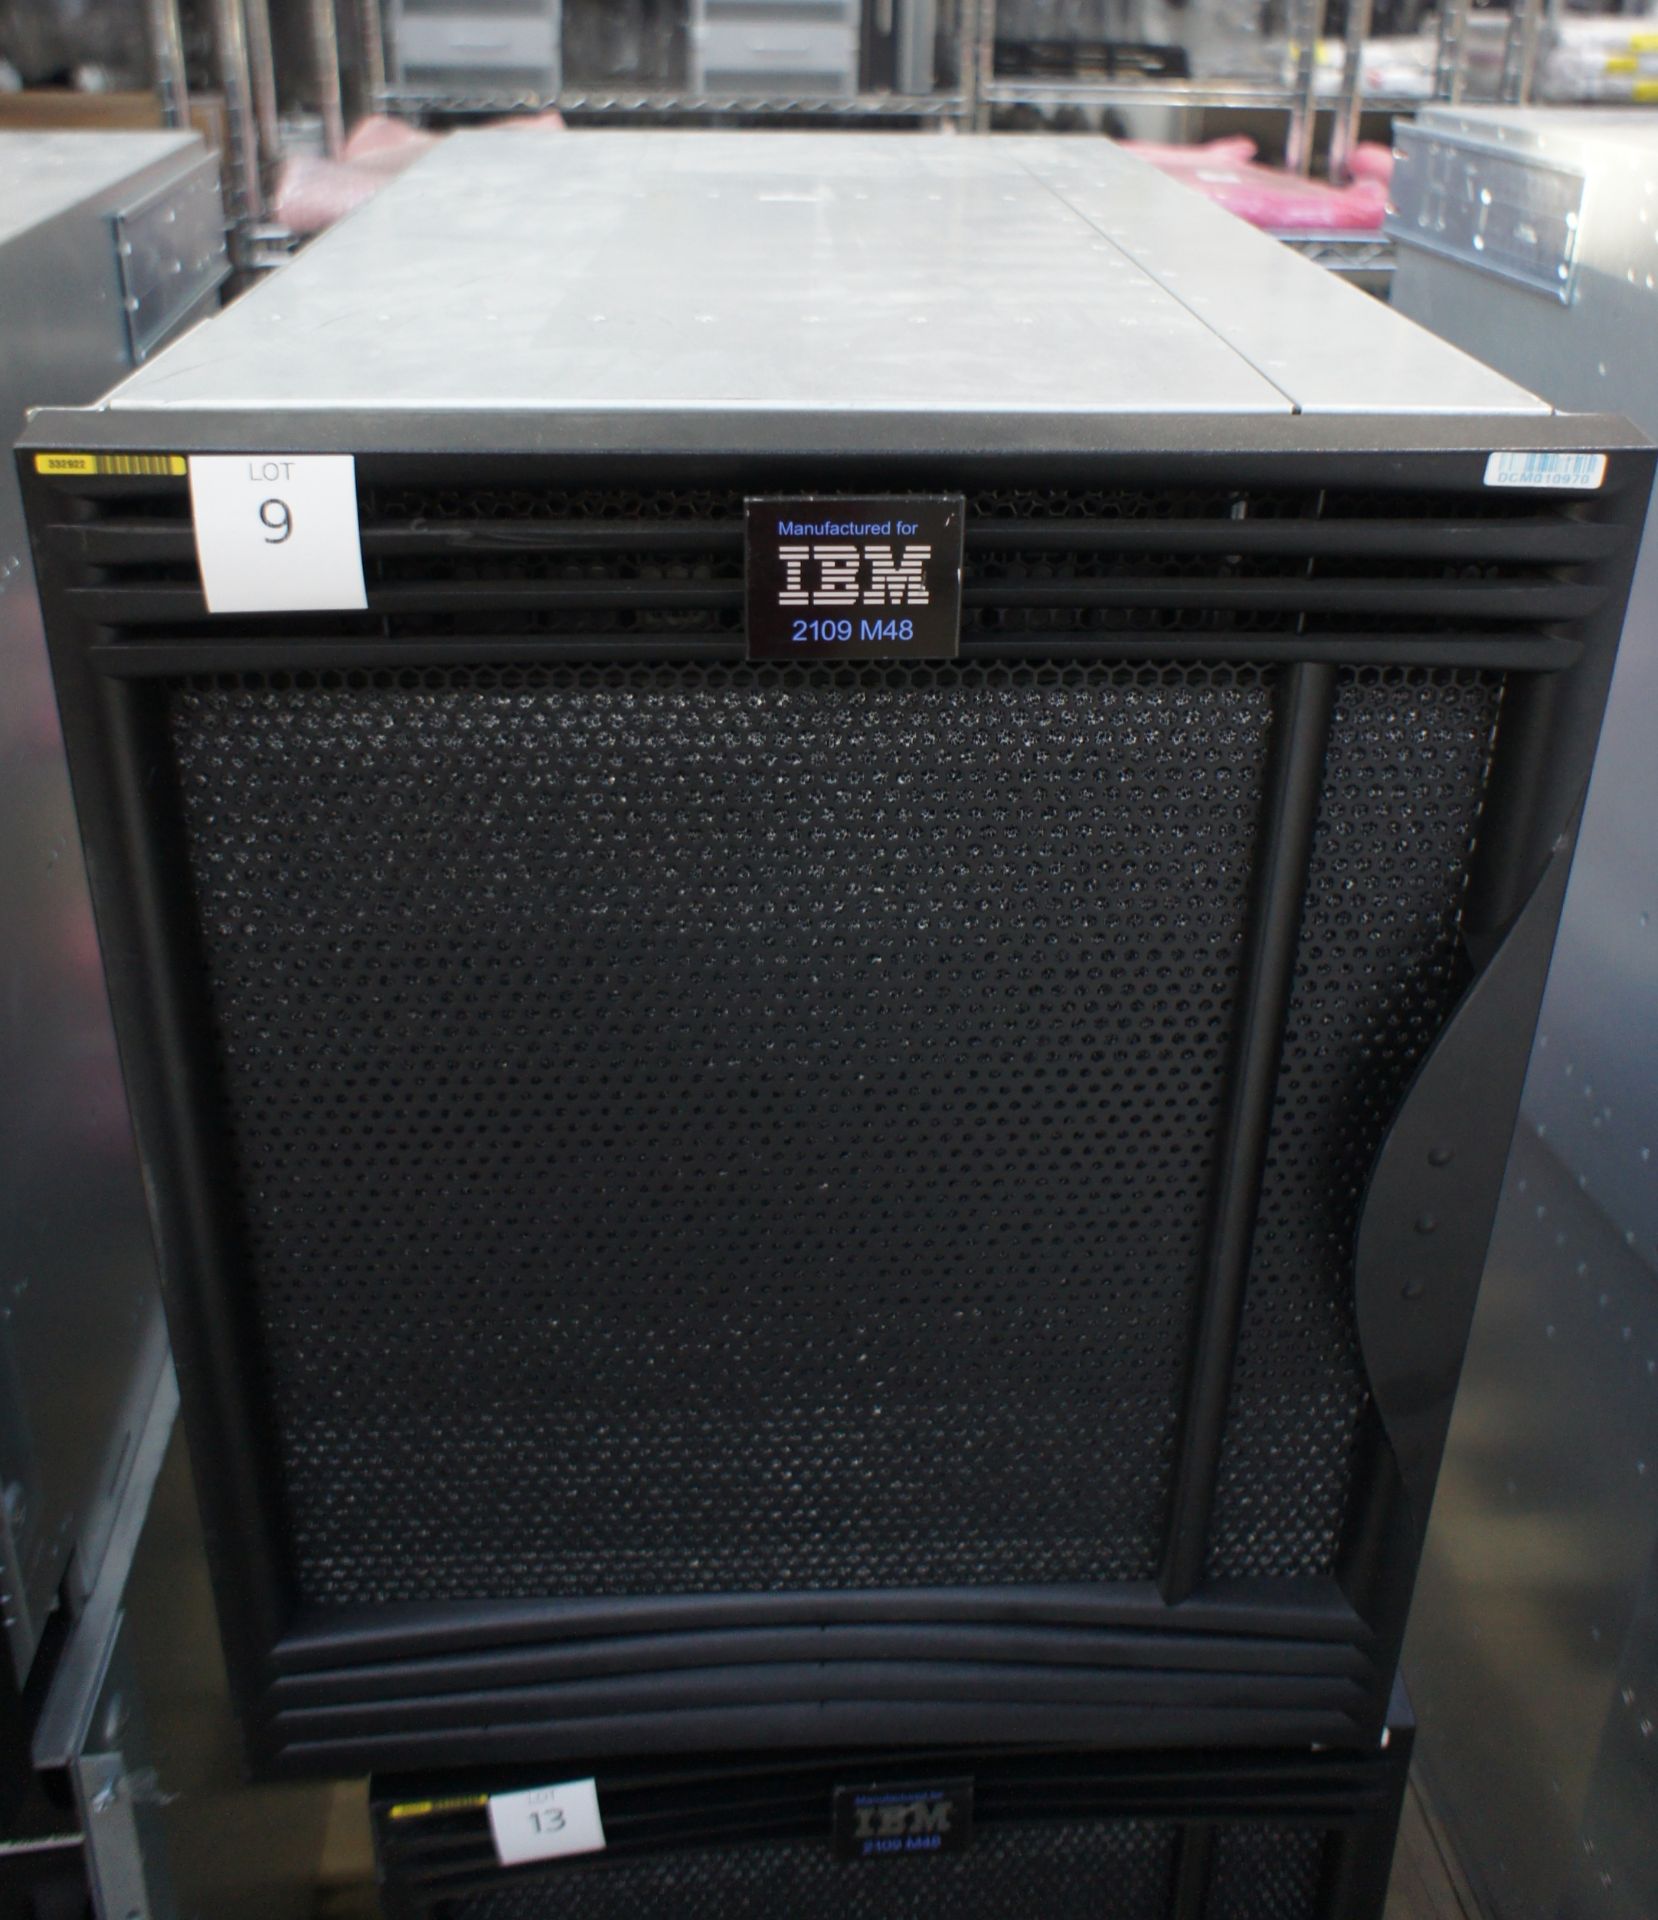 IBM2109-M48 SAN256 director cabinet with 8x FC4/32 cards and 1x CP4 cards - Image 4 of 4